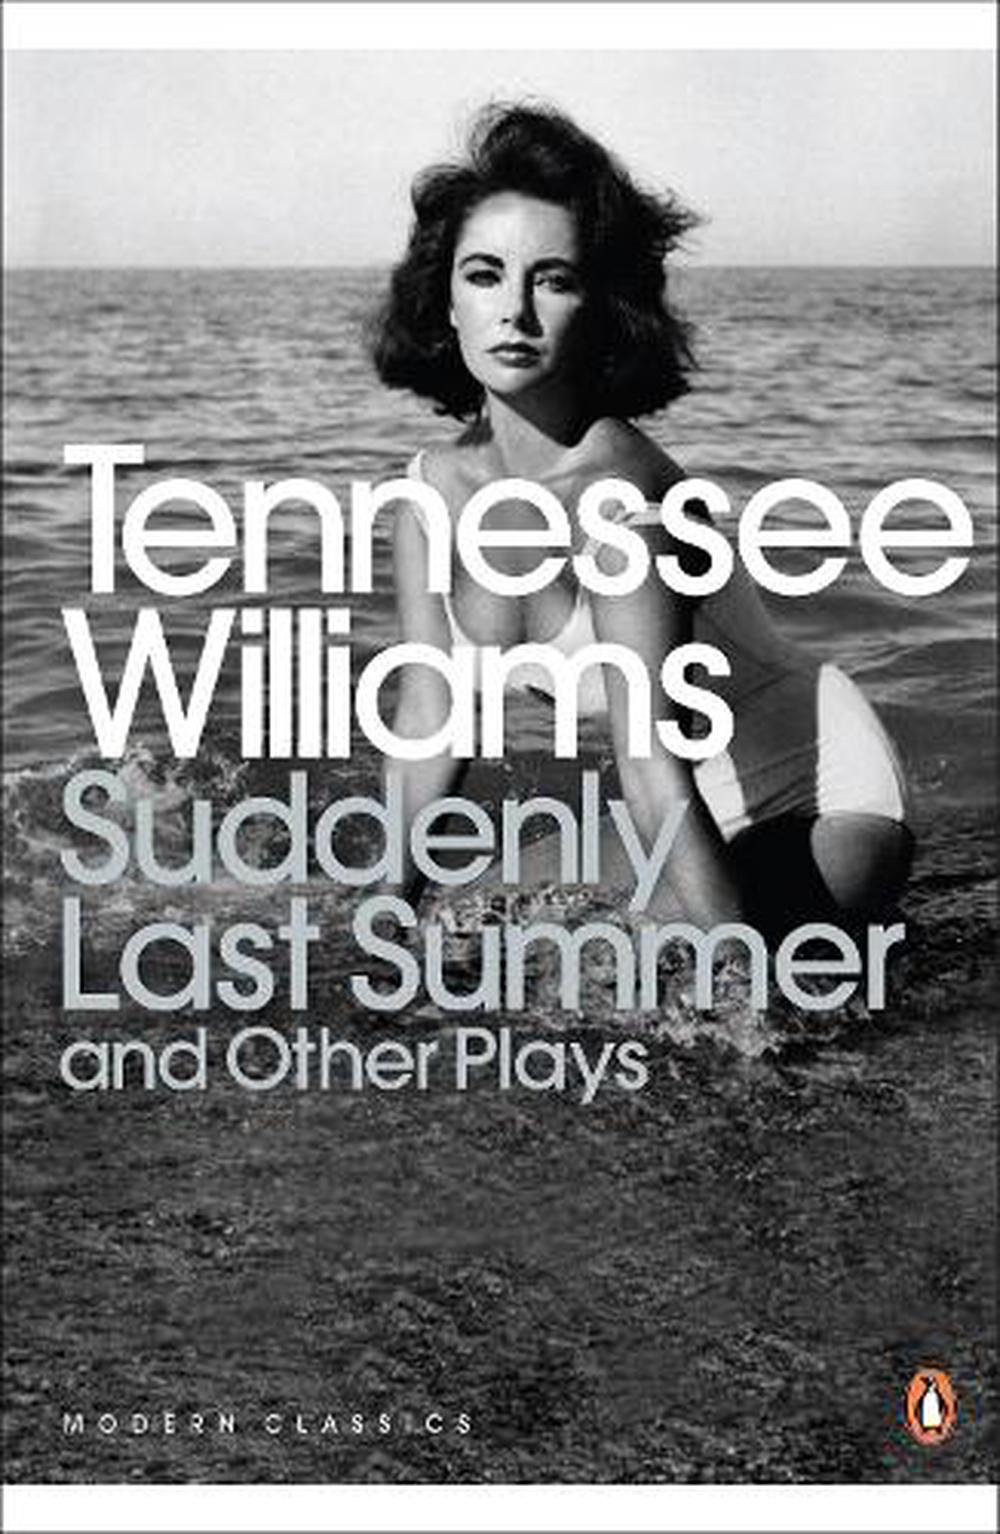 Other　9780141191096　online　Paperback,　Suddenly　Summer　Tennessee　at　Williams,　by　Last　Nile　and　Plays　Buy　The